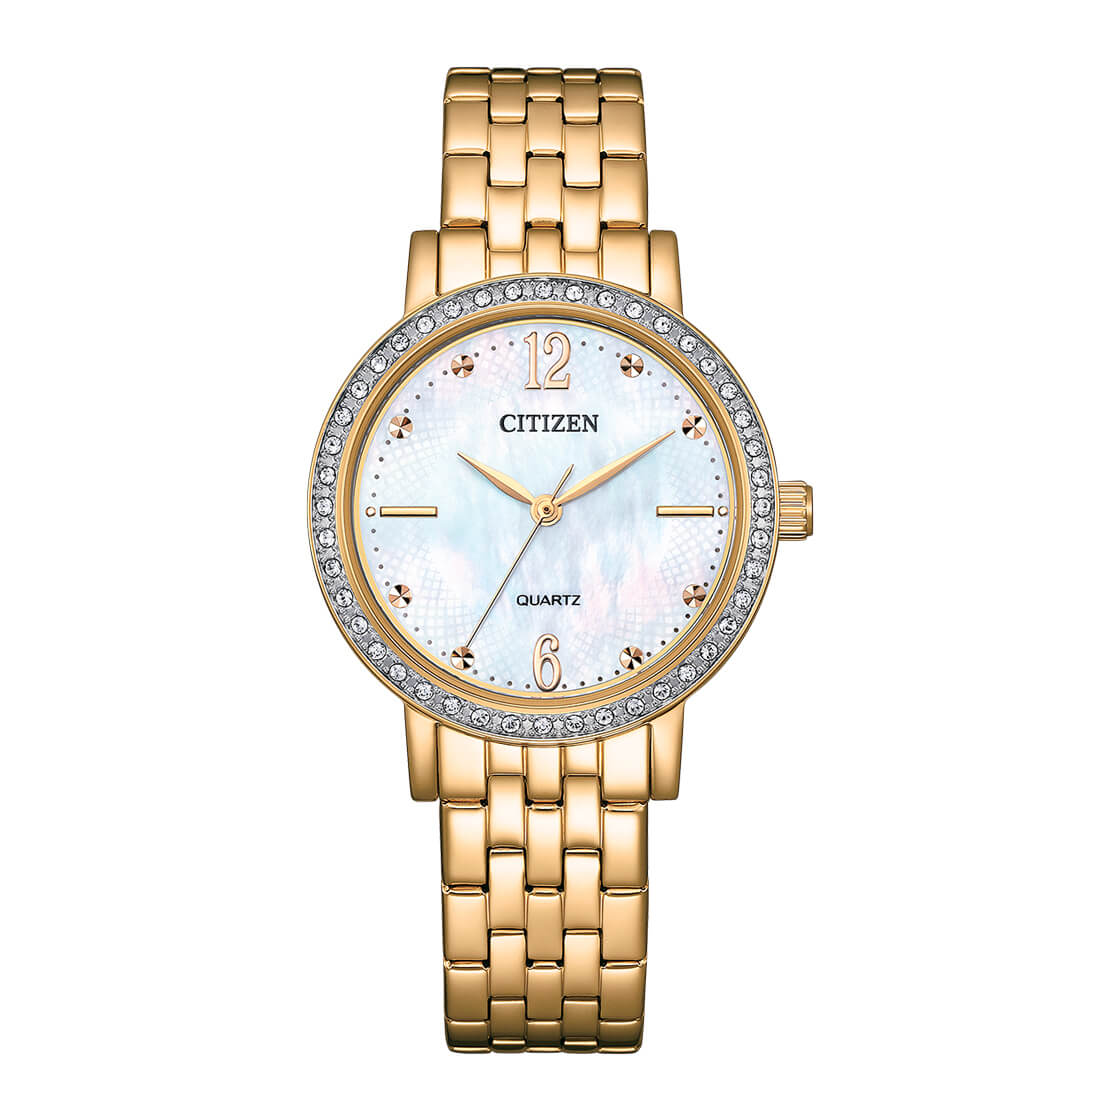 Citizen Watches, Timepieces for Men and Women